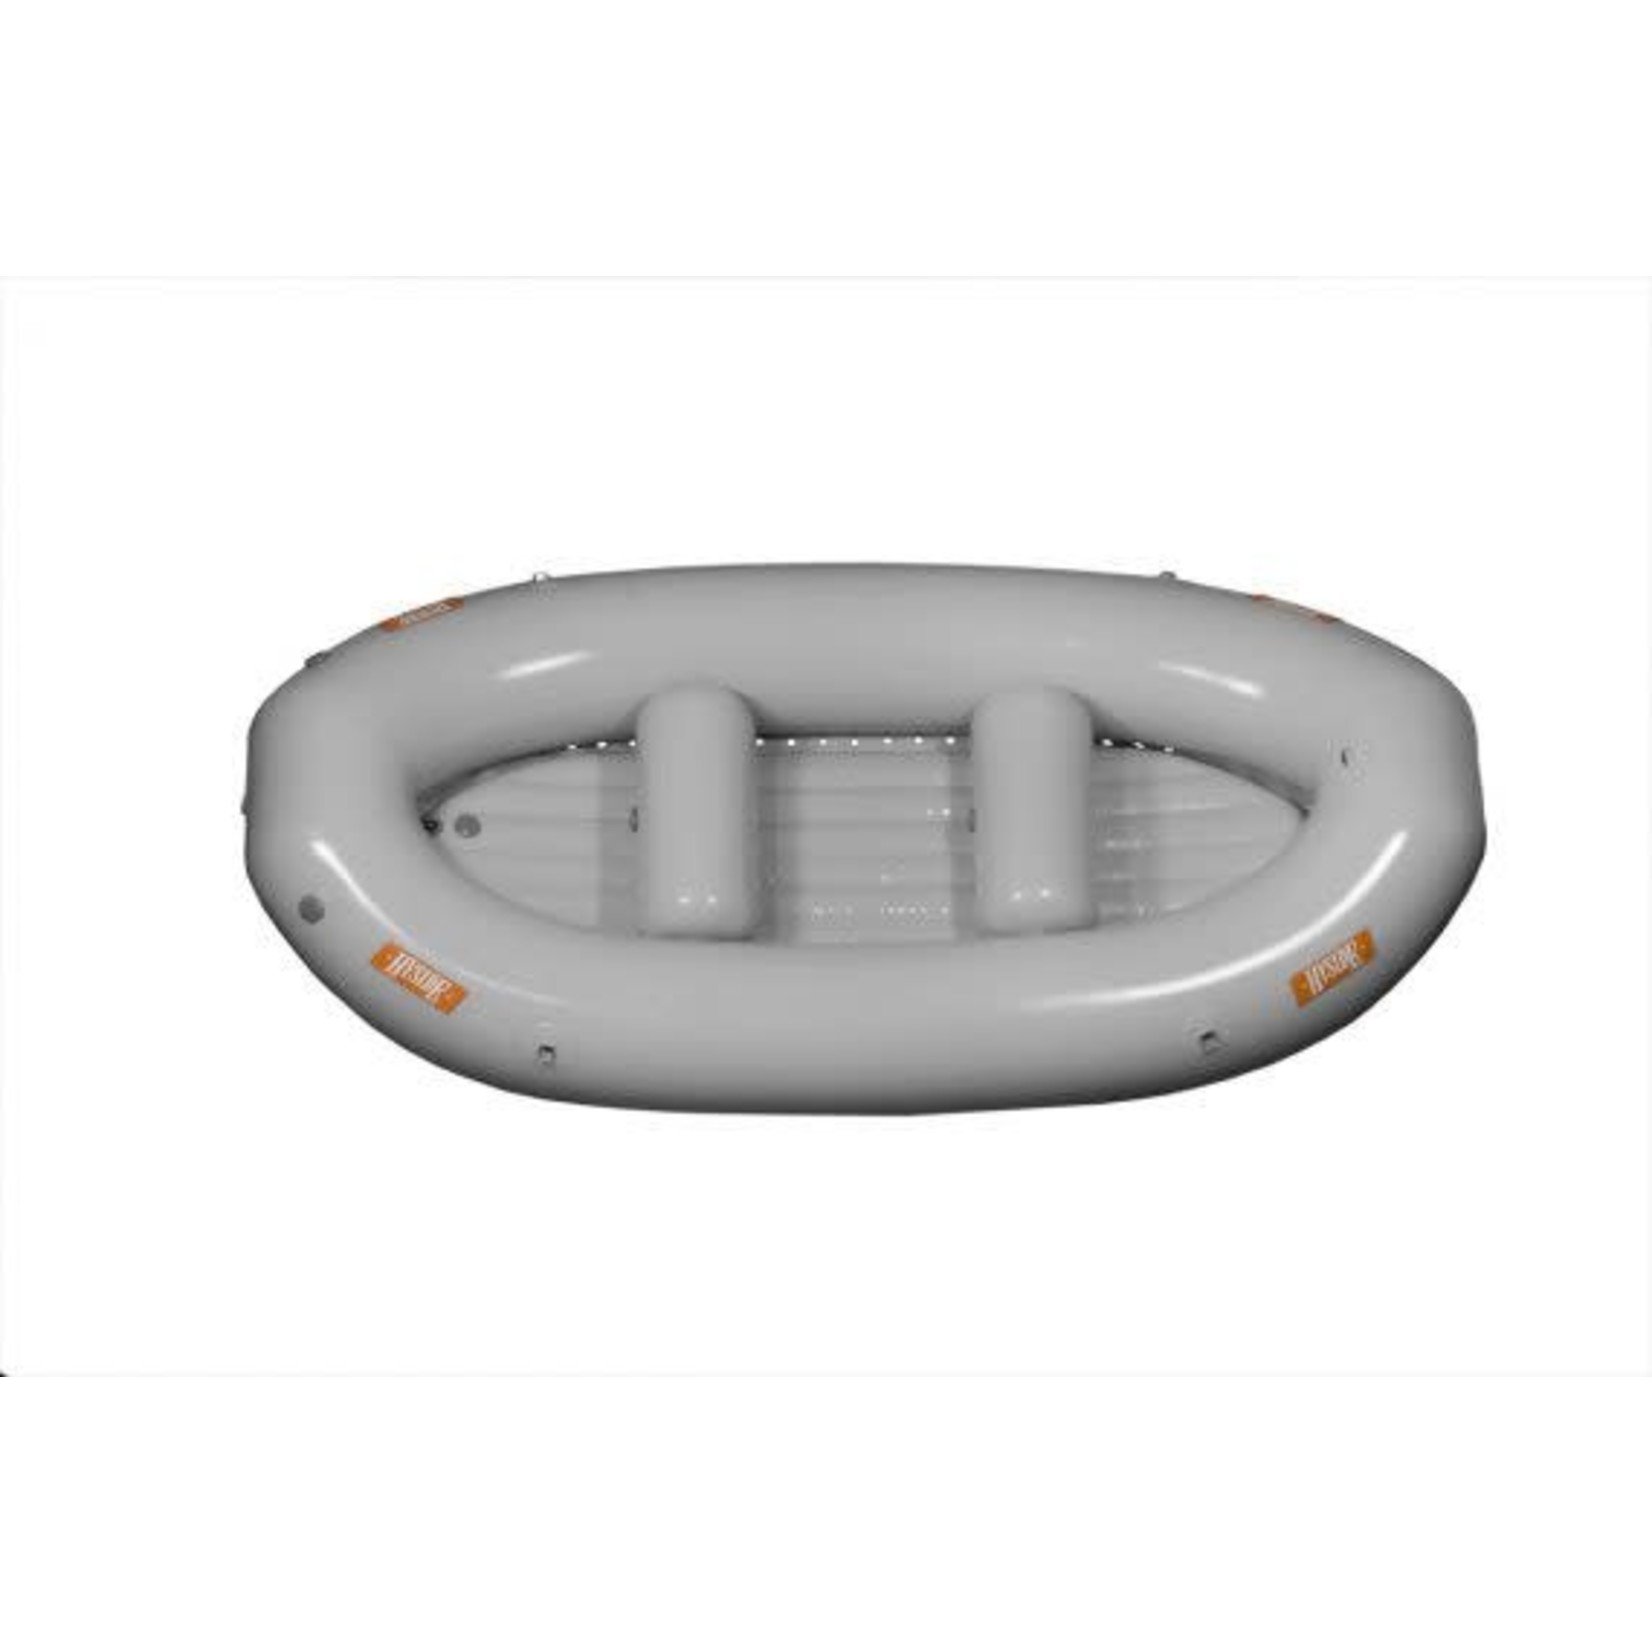 Hyside Inflatables Hyside Outfitter 10.5 Mini-Max Raft